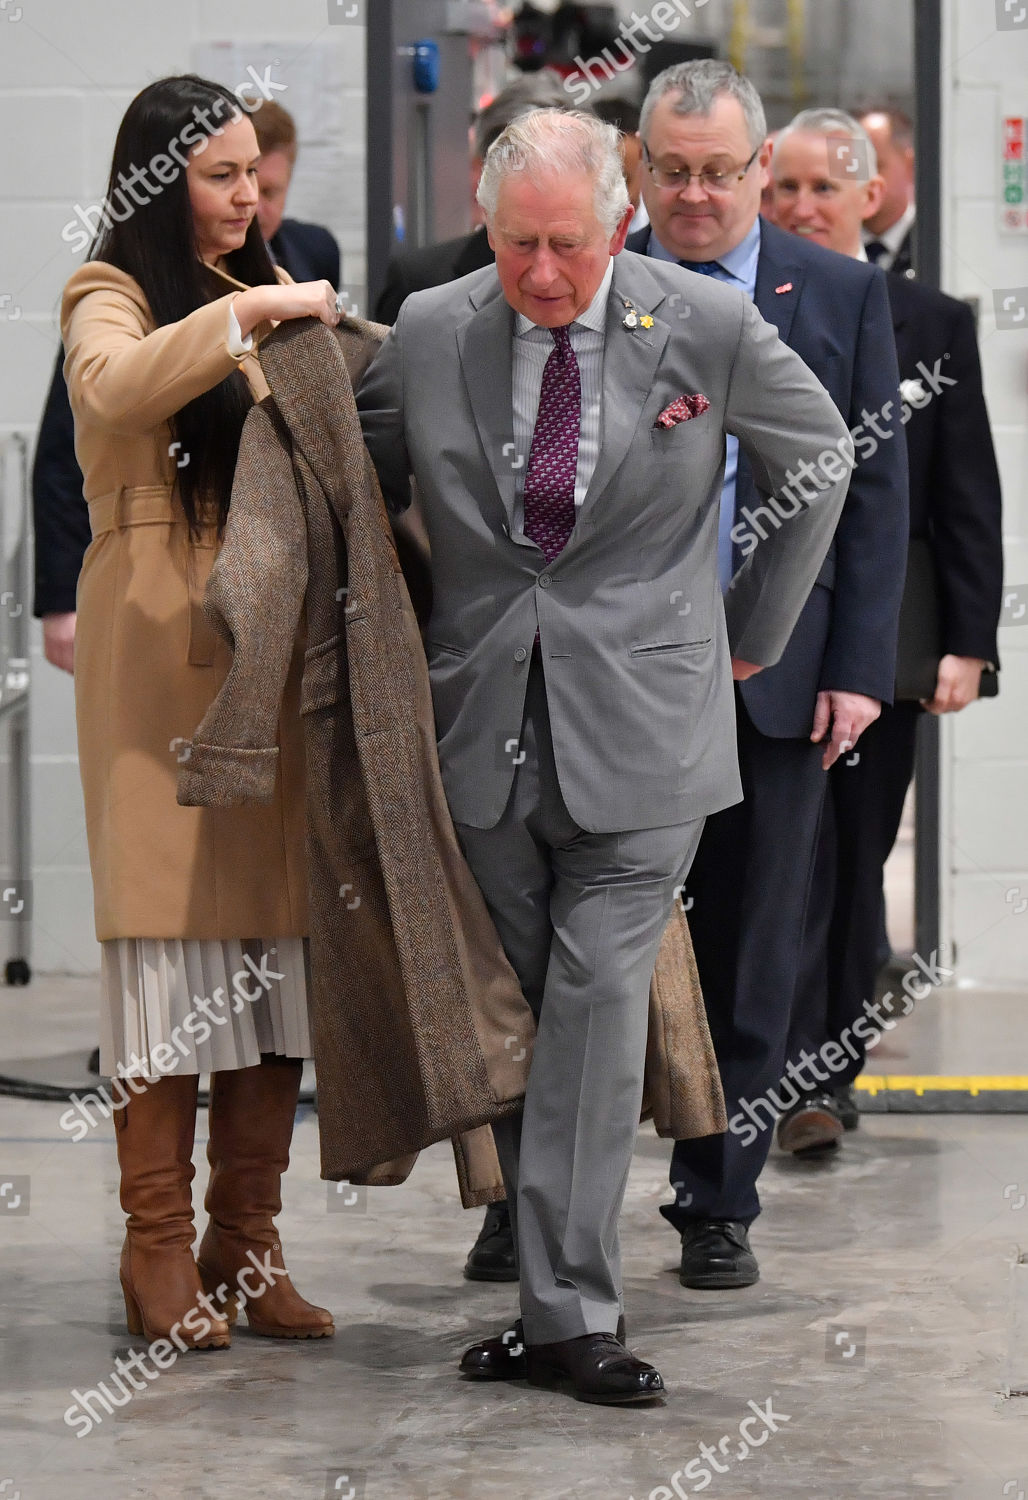 prince-charles-visit-to-south-wales-uk-shutterstock-editorial-10563131t.jpg